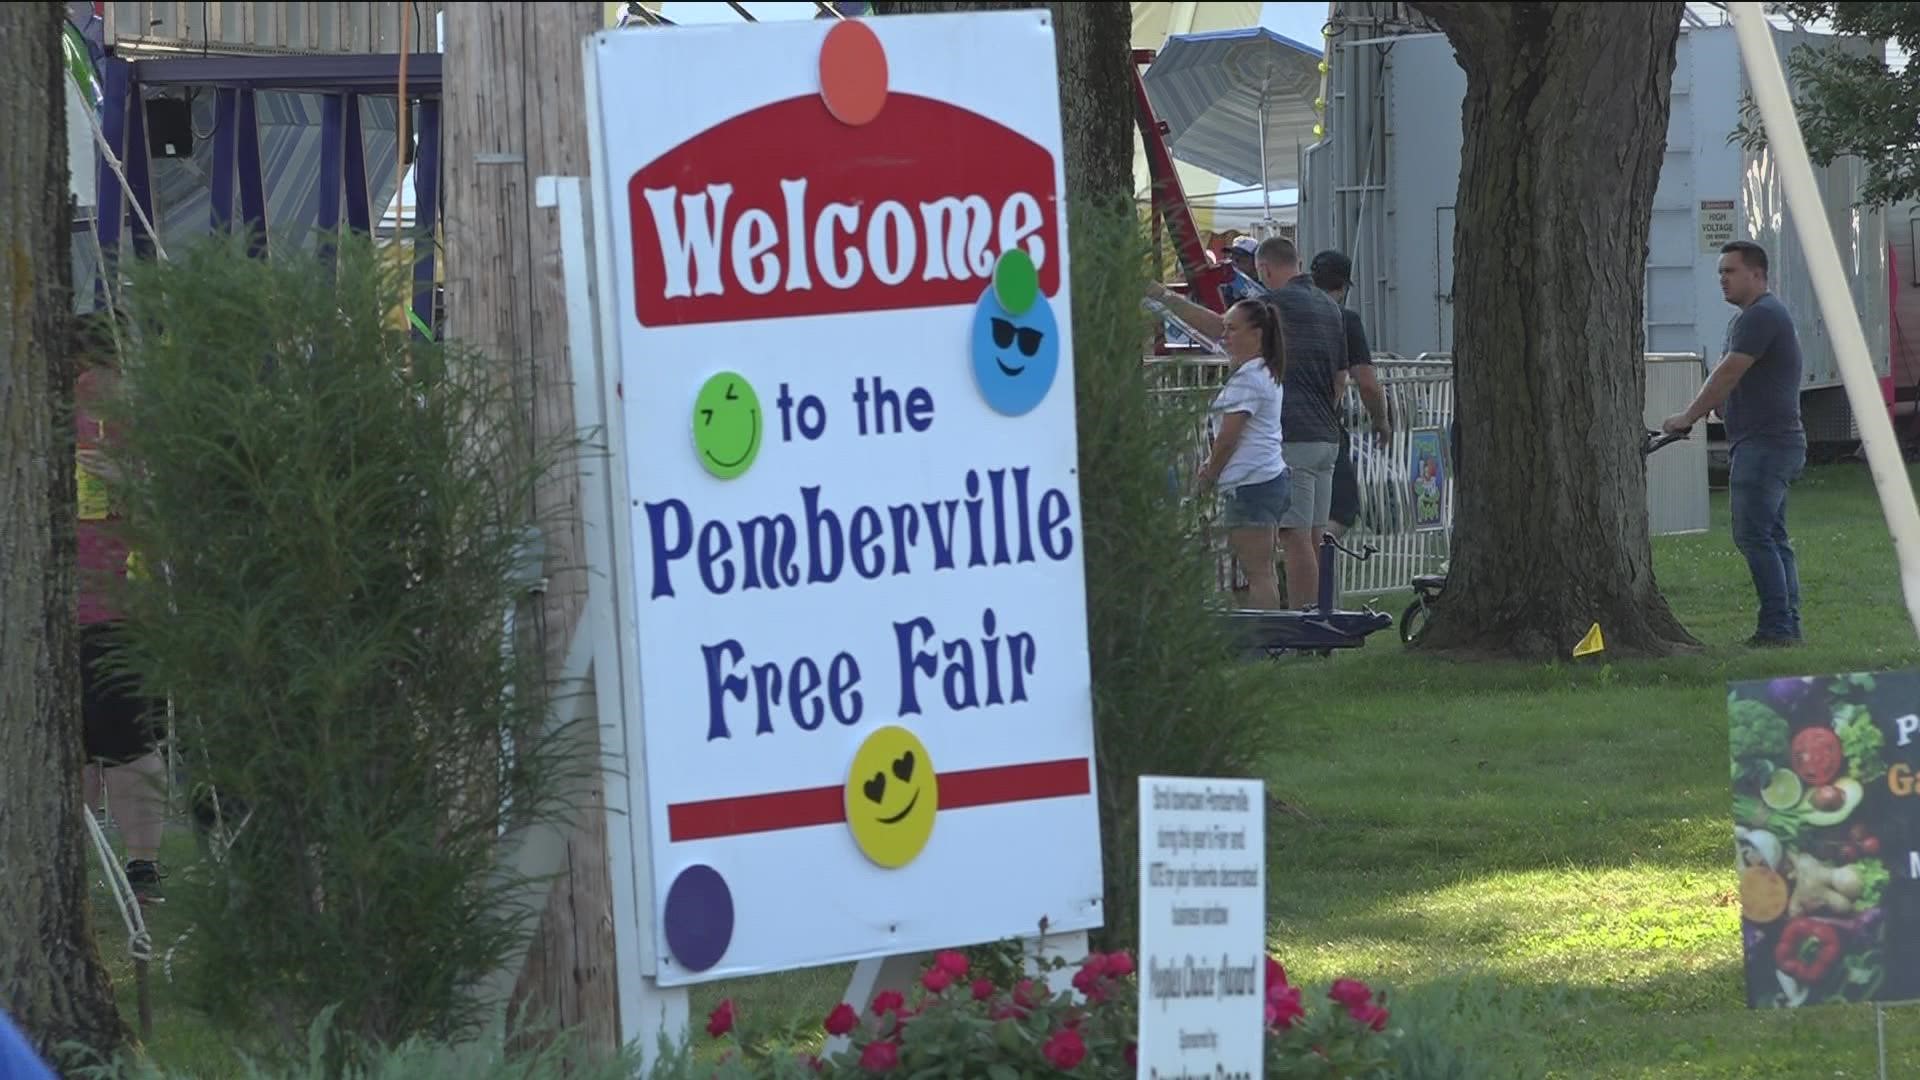 The Pemberville Free Fair will feature a Miles of Smiles parade Saturday.